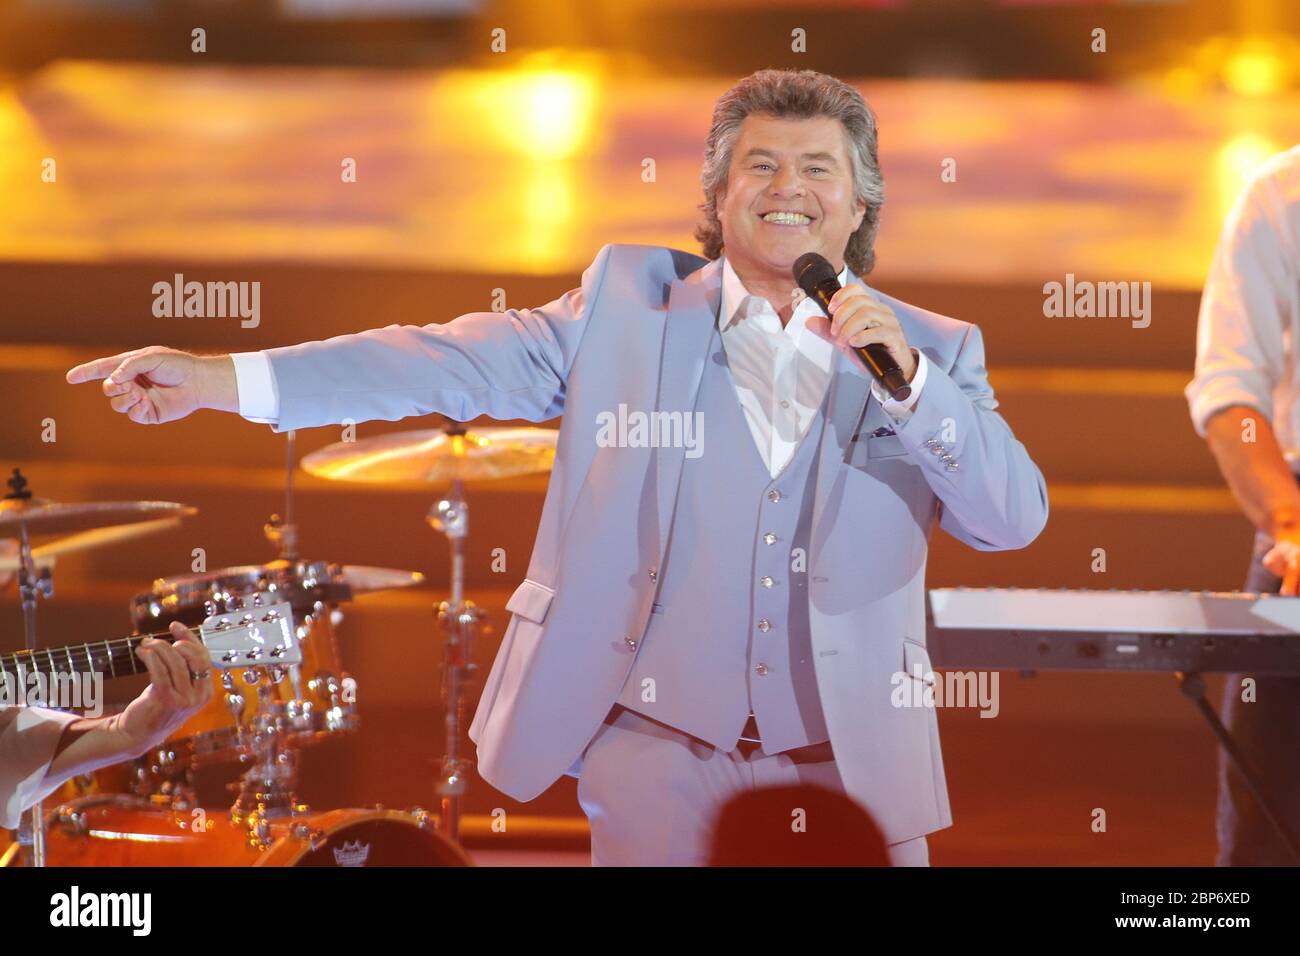 Andy Borg,Welcome to Carmen Nebel,Offenburg,13.07.2019 Stock Photo